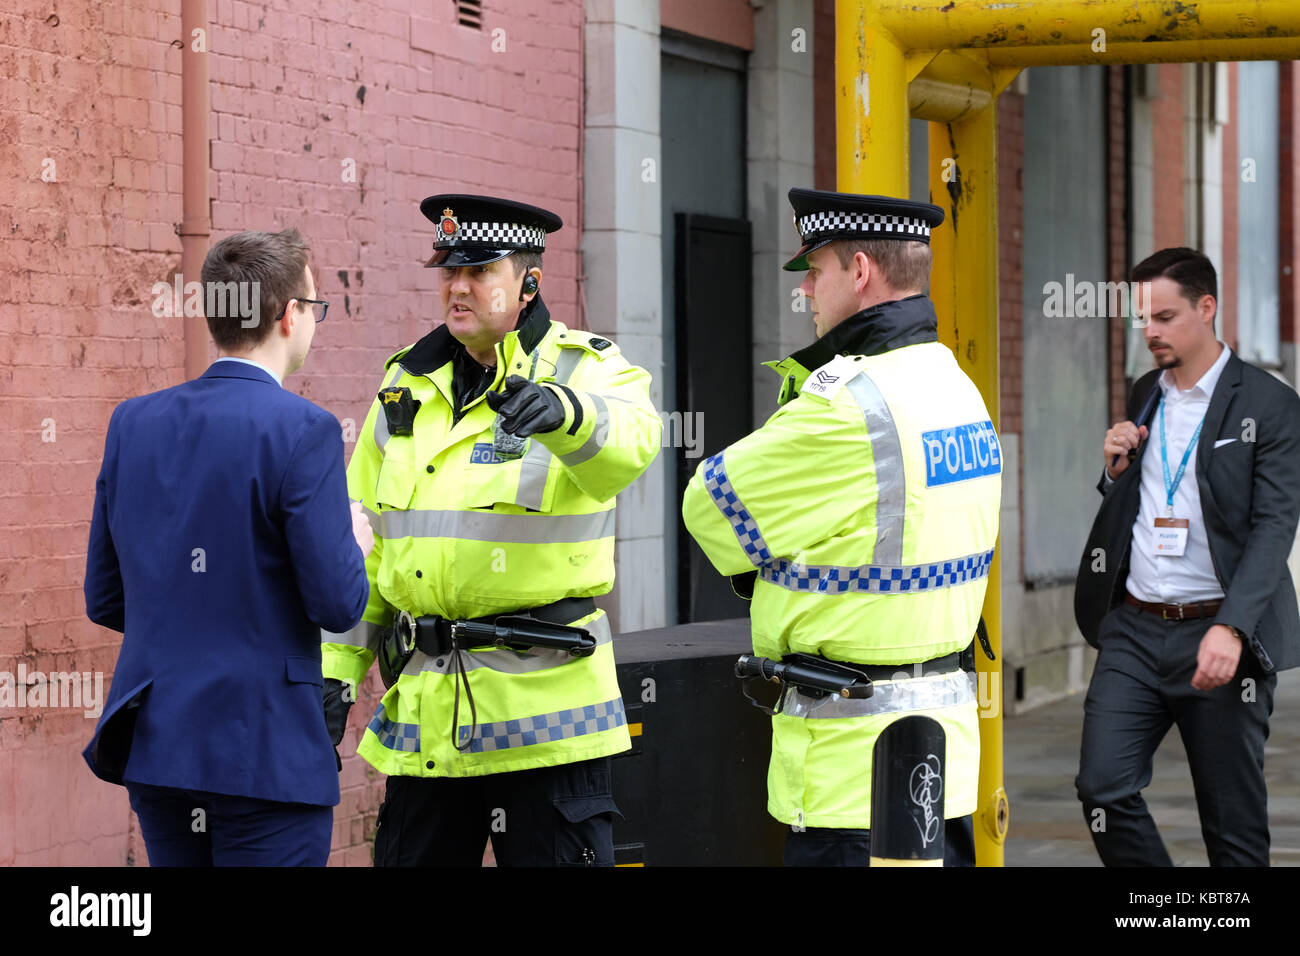 Manchester UK, Sunday 1st October 2017 - A Conservative Party delegate seeks directions from one of the many police officers deployed across the city on the opening day of the Conservative Party Conference. Steven May / Alamy Live News Stock Photo